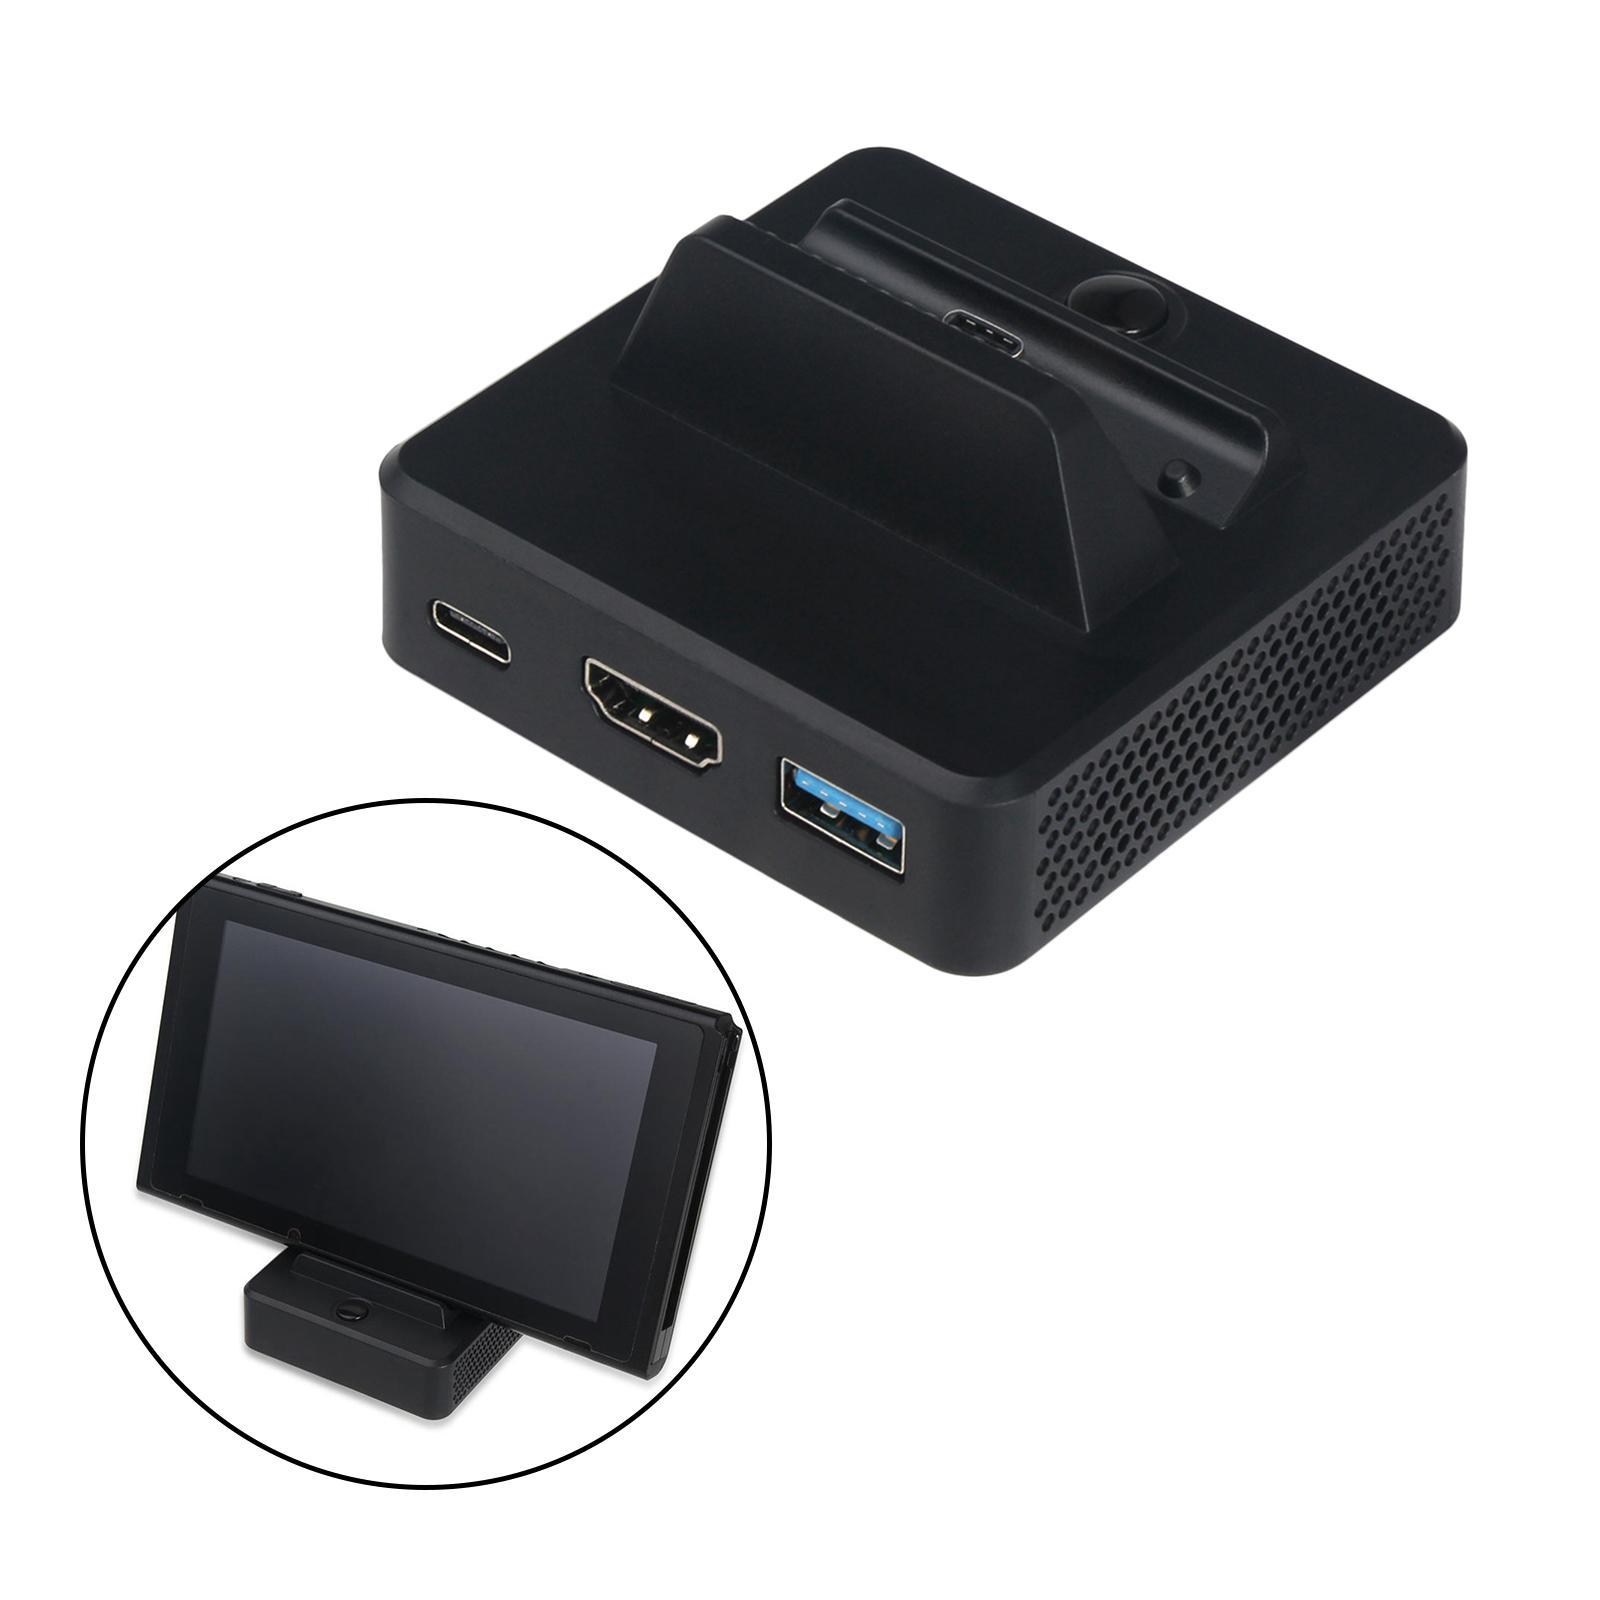 TNS-1828 Video Converter Dock HDMI TV Adapter Charger for Nintendo Switch